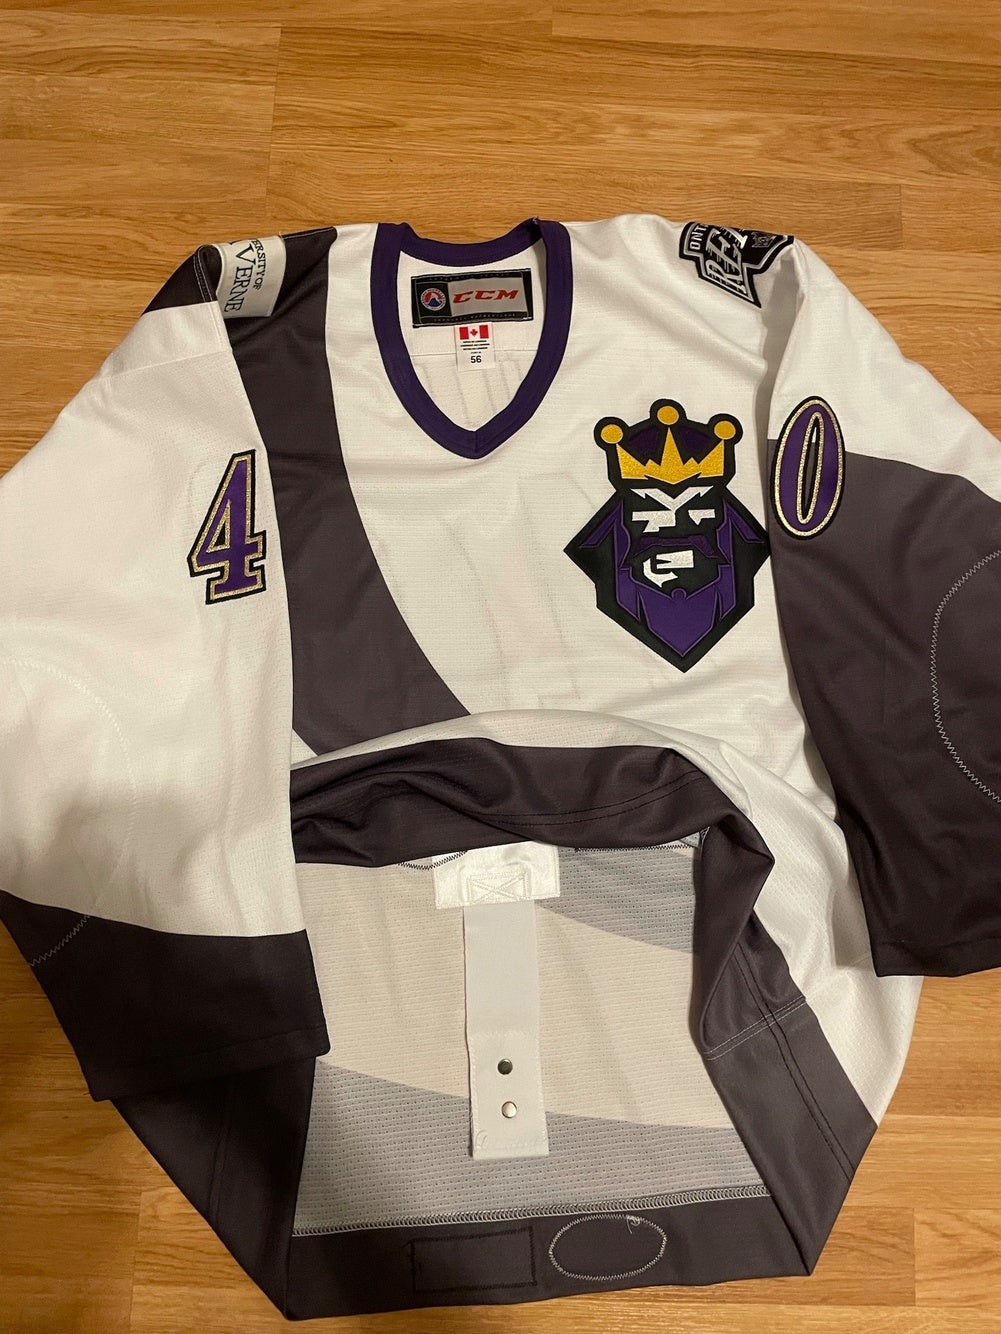 LA Kings on Instagram: A FREE Kings game jersey WORN and SIGNED